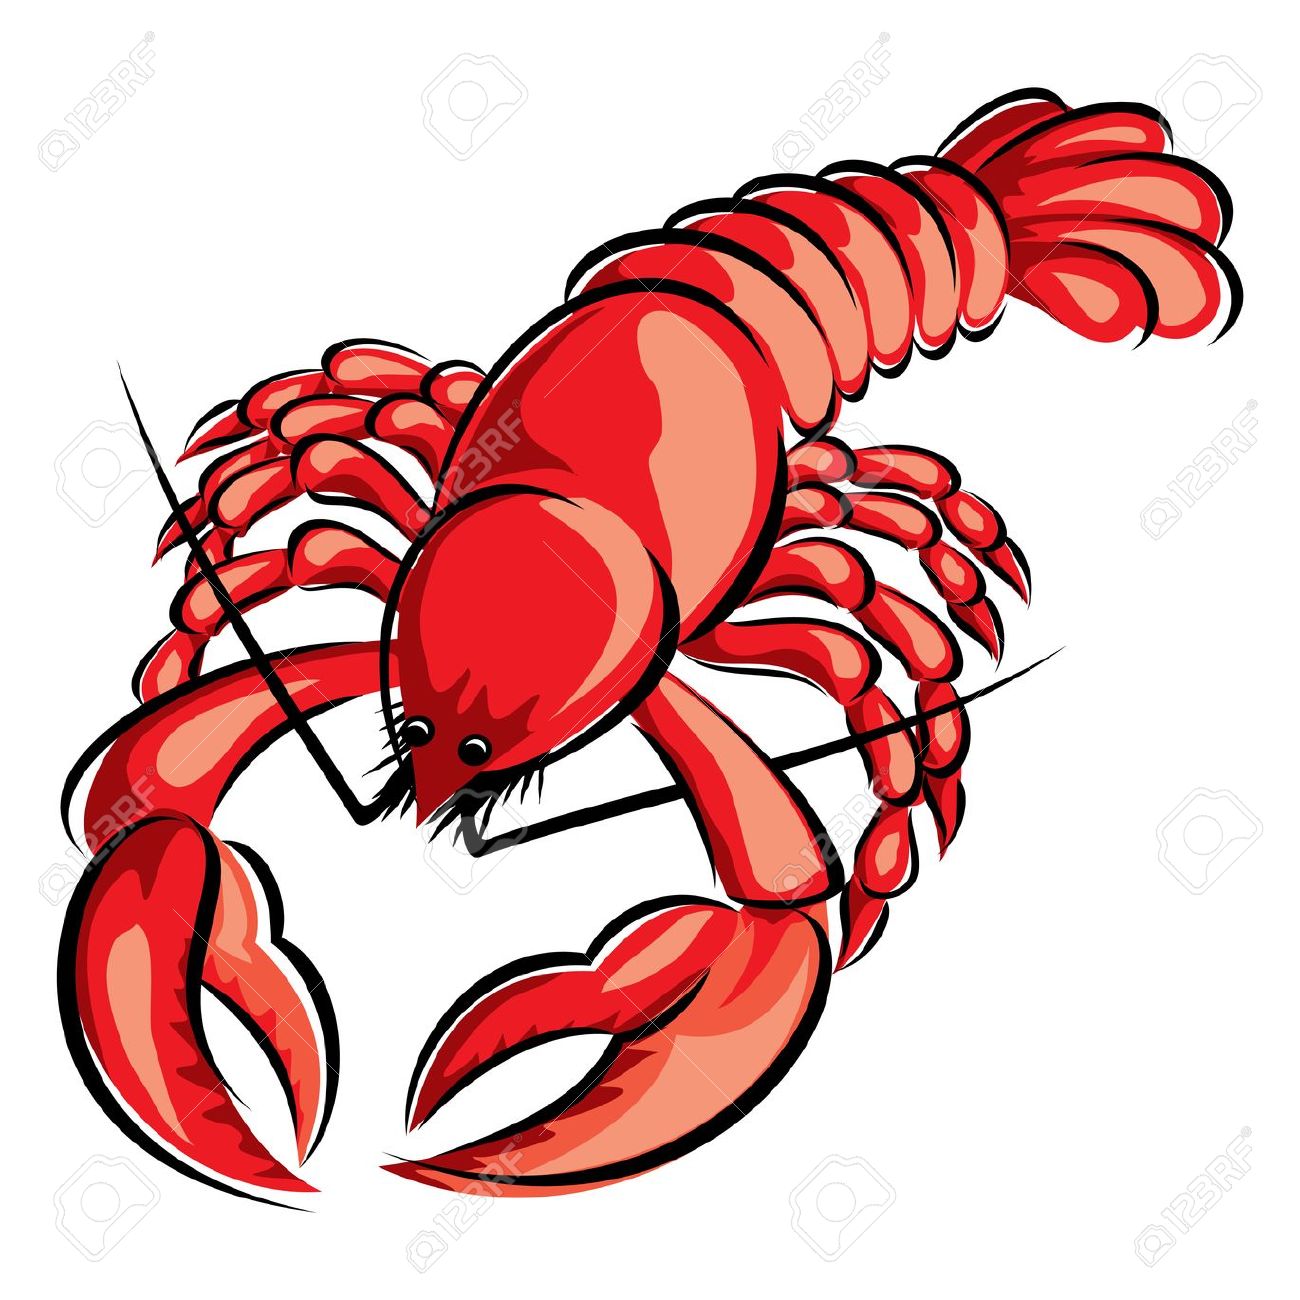 free clipart images lobster - photo #19